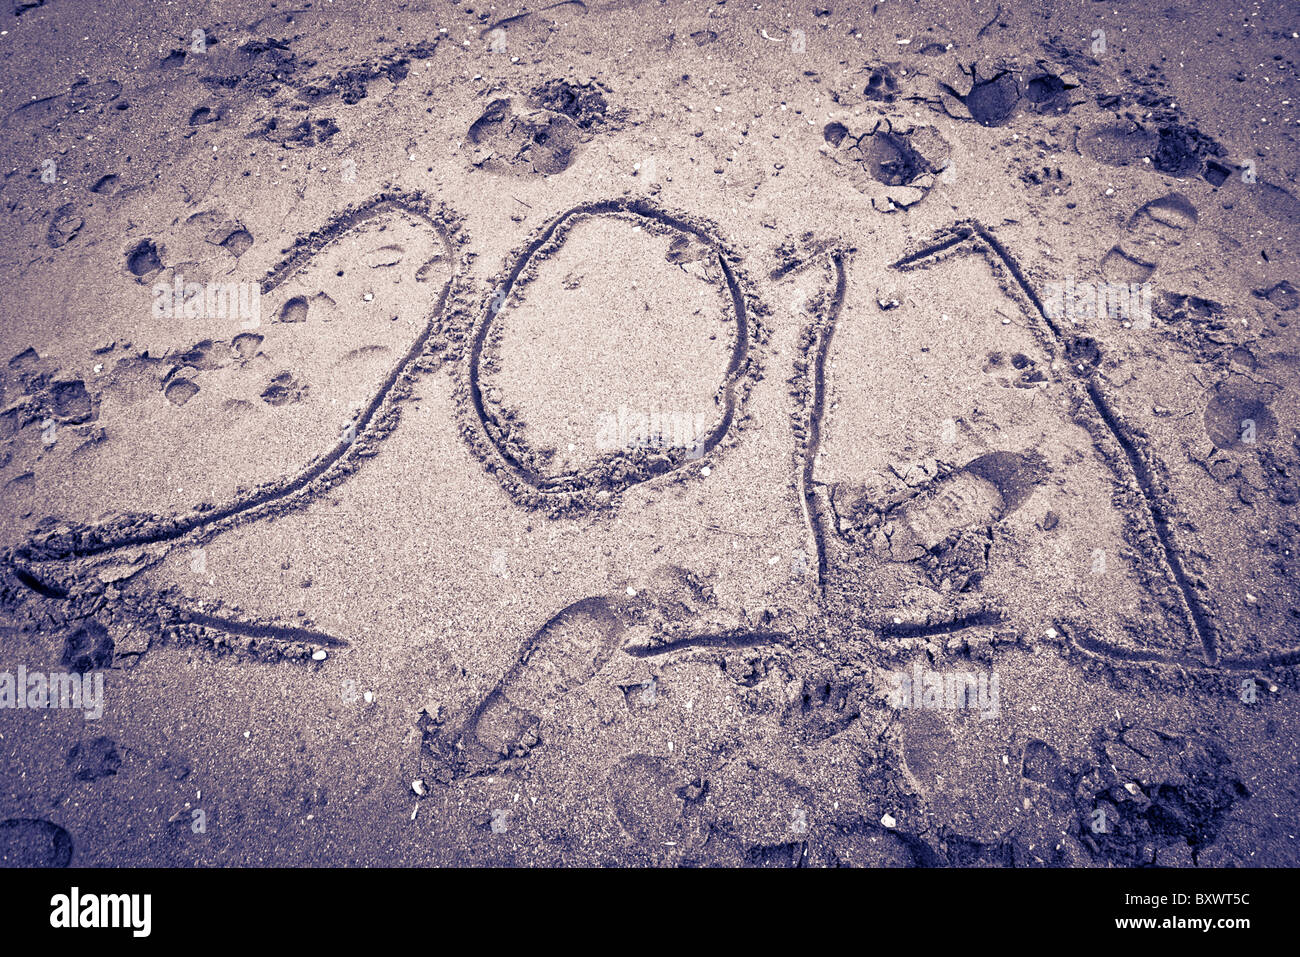 '2011' drawn into the sand on a beach. Stock Photo